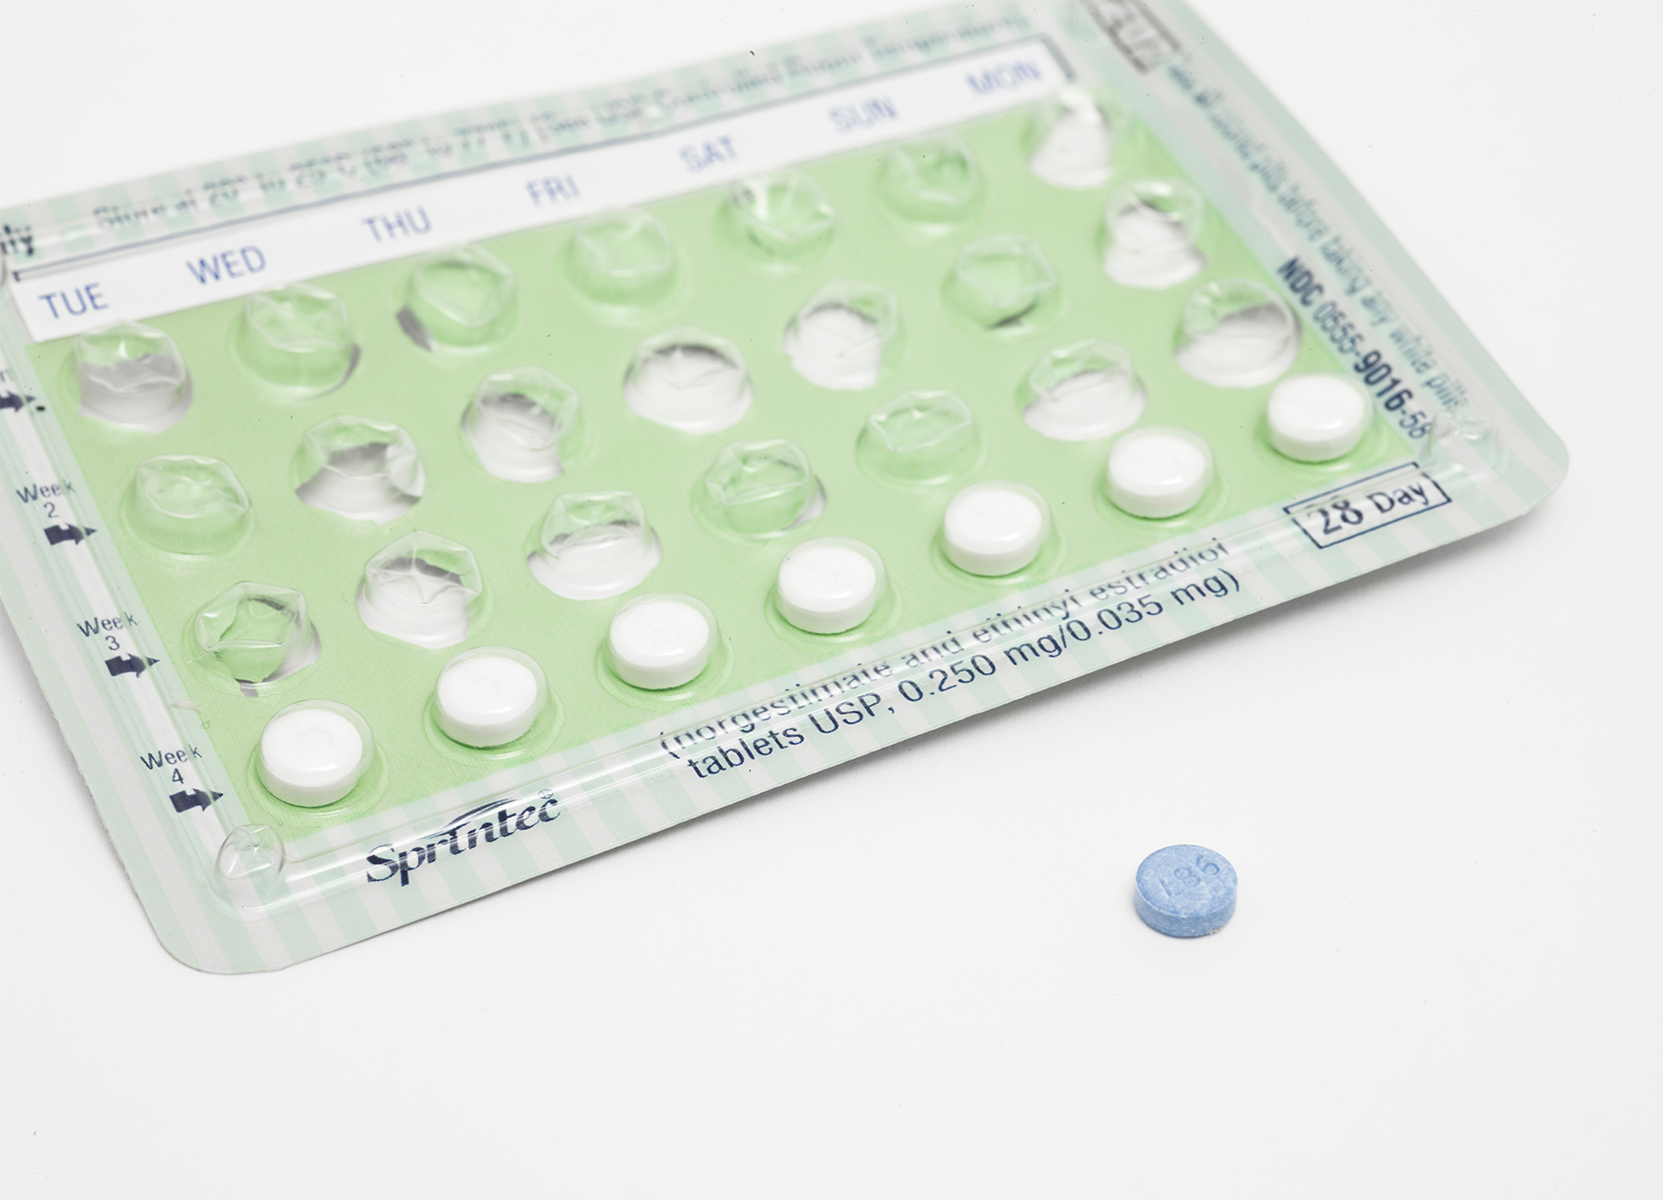 A bitter pill to swallow: The risks & side effects of hormonal birth control